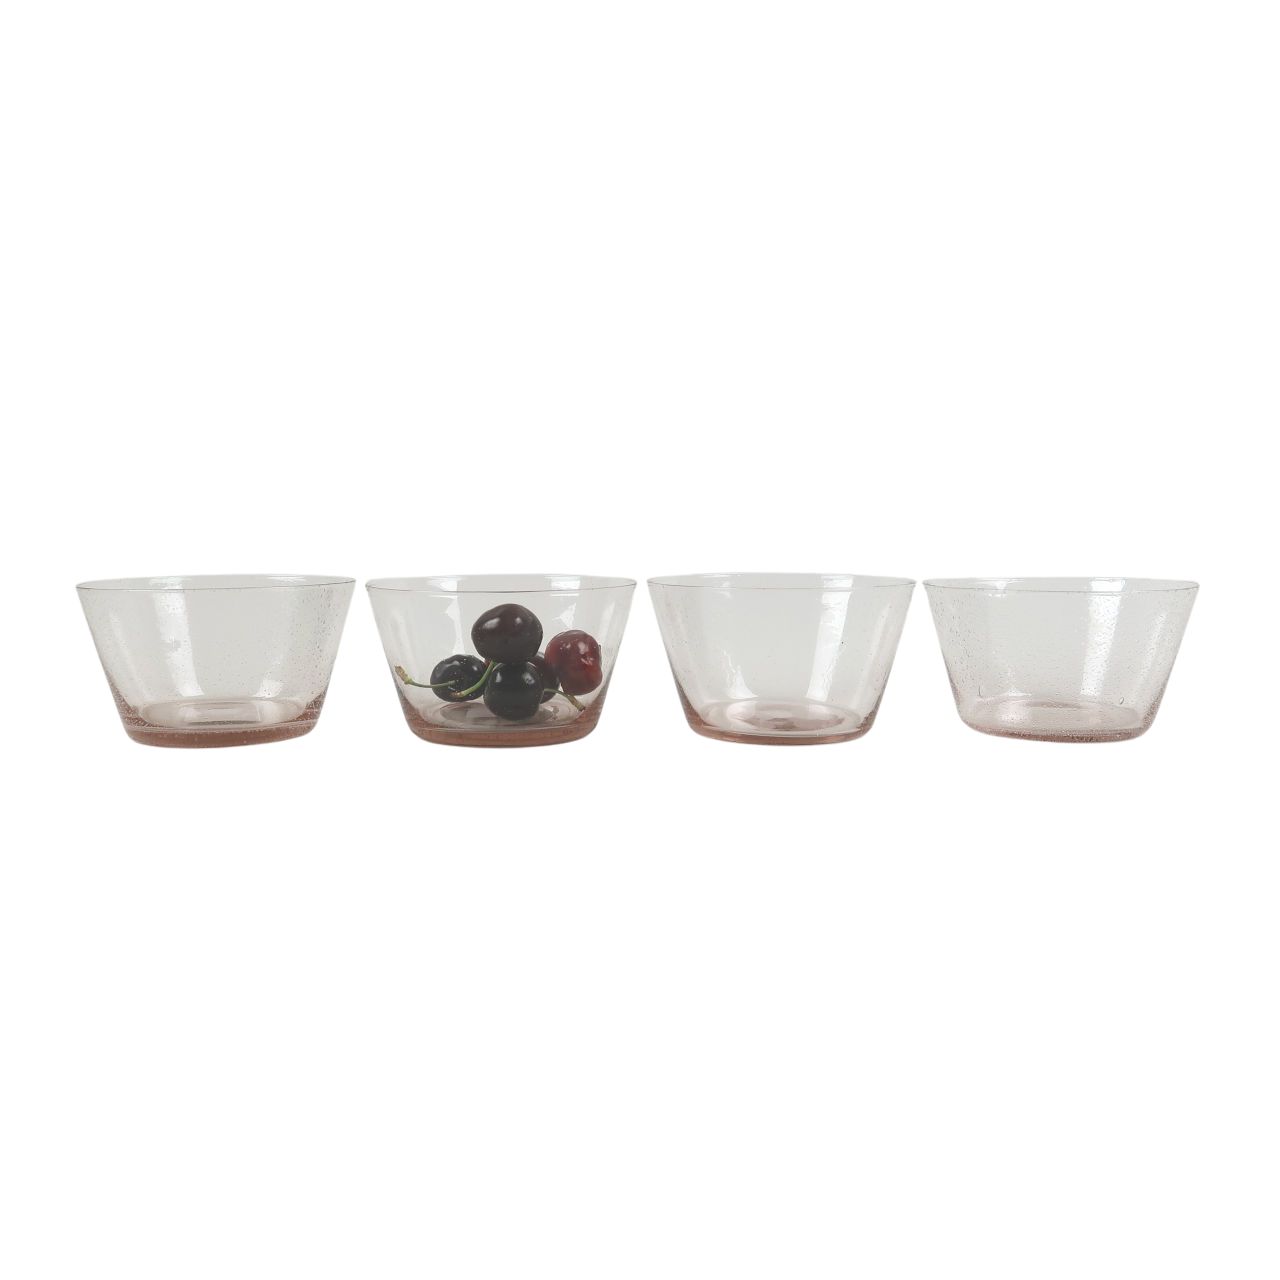 British Colour Standard Boxed Set of 4 Small Glass Bowls – Old Rose